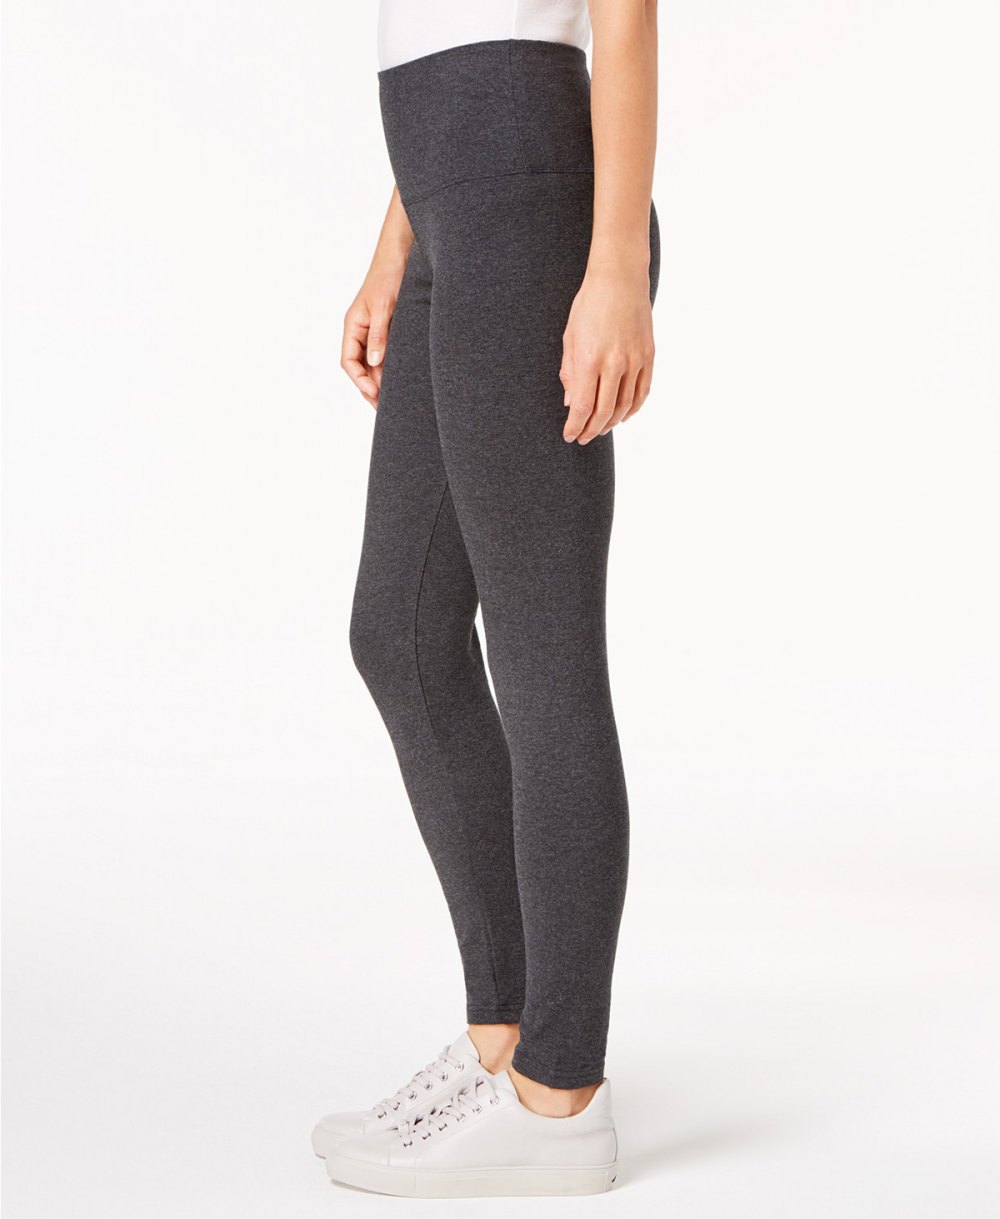 These $22 Leggings Have So Many 5-Star Reviews! | Us Weekly